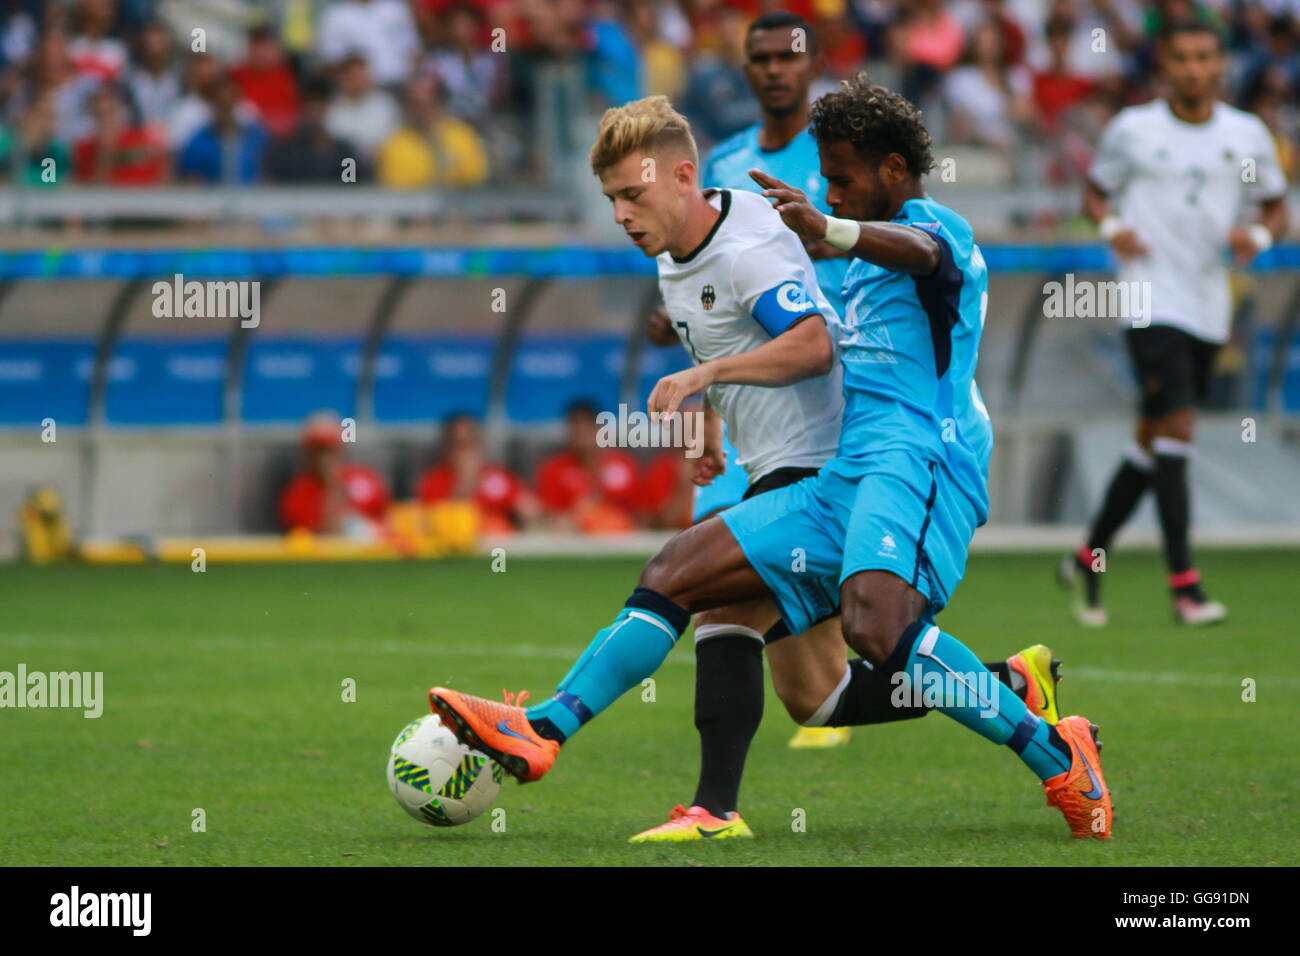 Belo Horizonte, MG. 10th August, 2016. Olympics 2016 Football BH - Maximilian MEYER, Germany, tries to escape the marking Ratu NAKALEVU, Fiji, during the match between Germany (GER) x FIJI (IFJ), the C&#39;s Olc Foc Football Group Male, the Rio 2016 Olympics, held in Mineirtadium in host city Belo Horizonte, MG. (Pho Credit:  Foto Arena LTDA/Alamy Live News Stock Photo